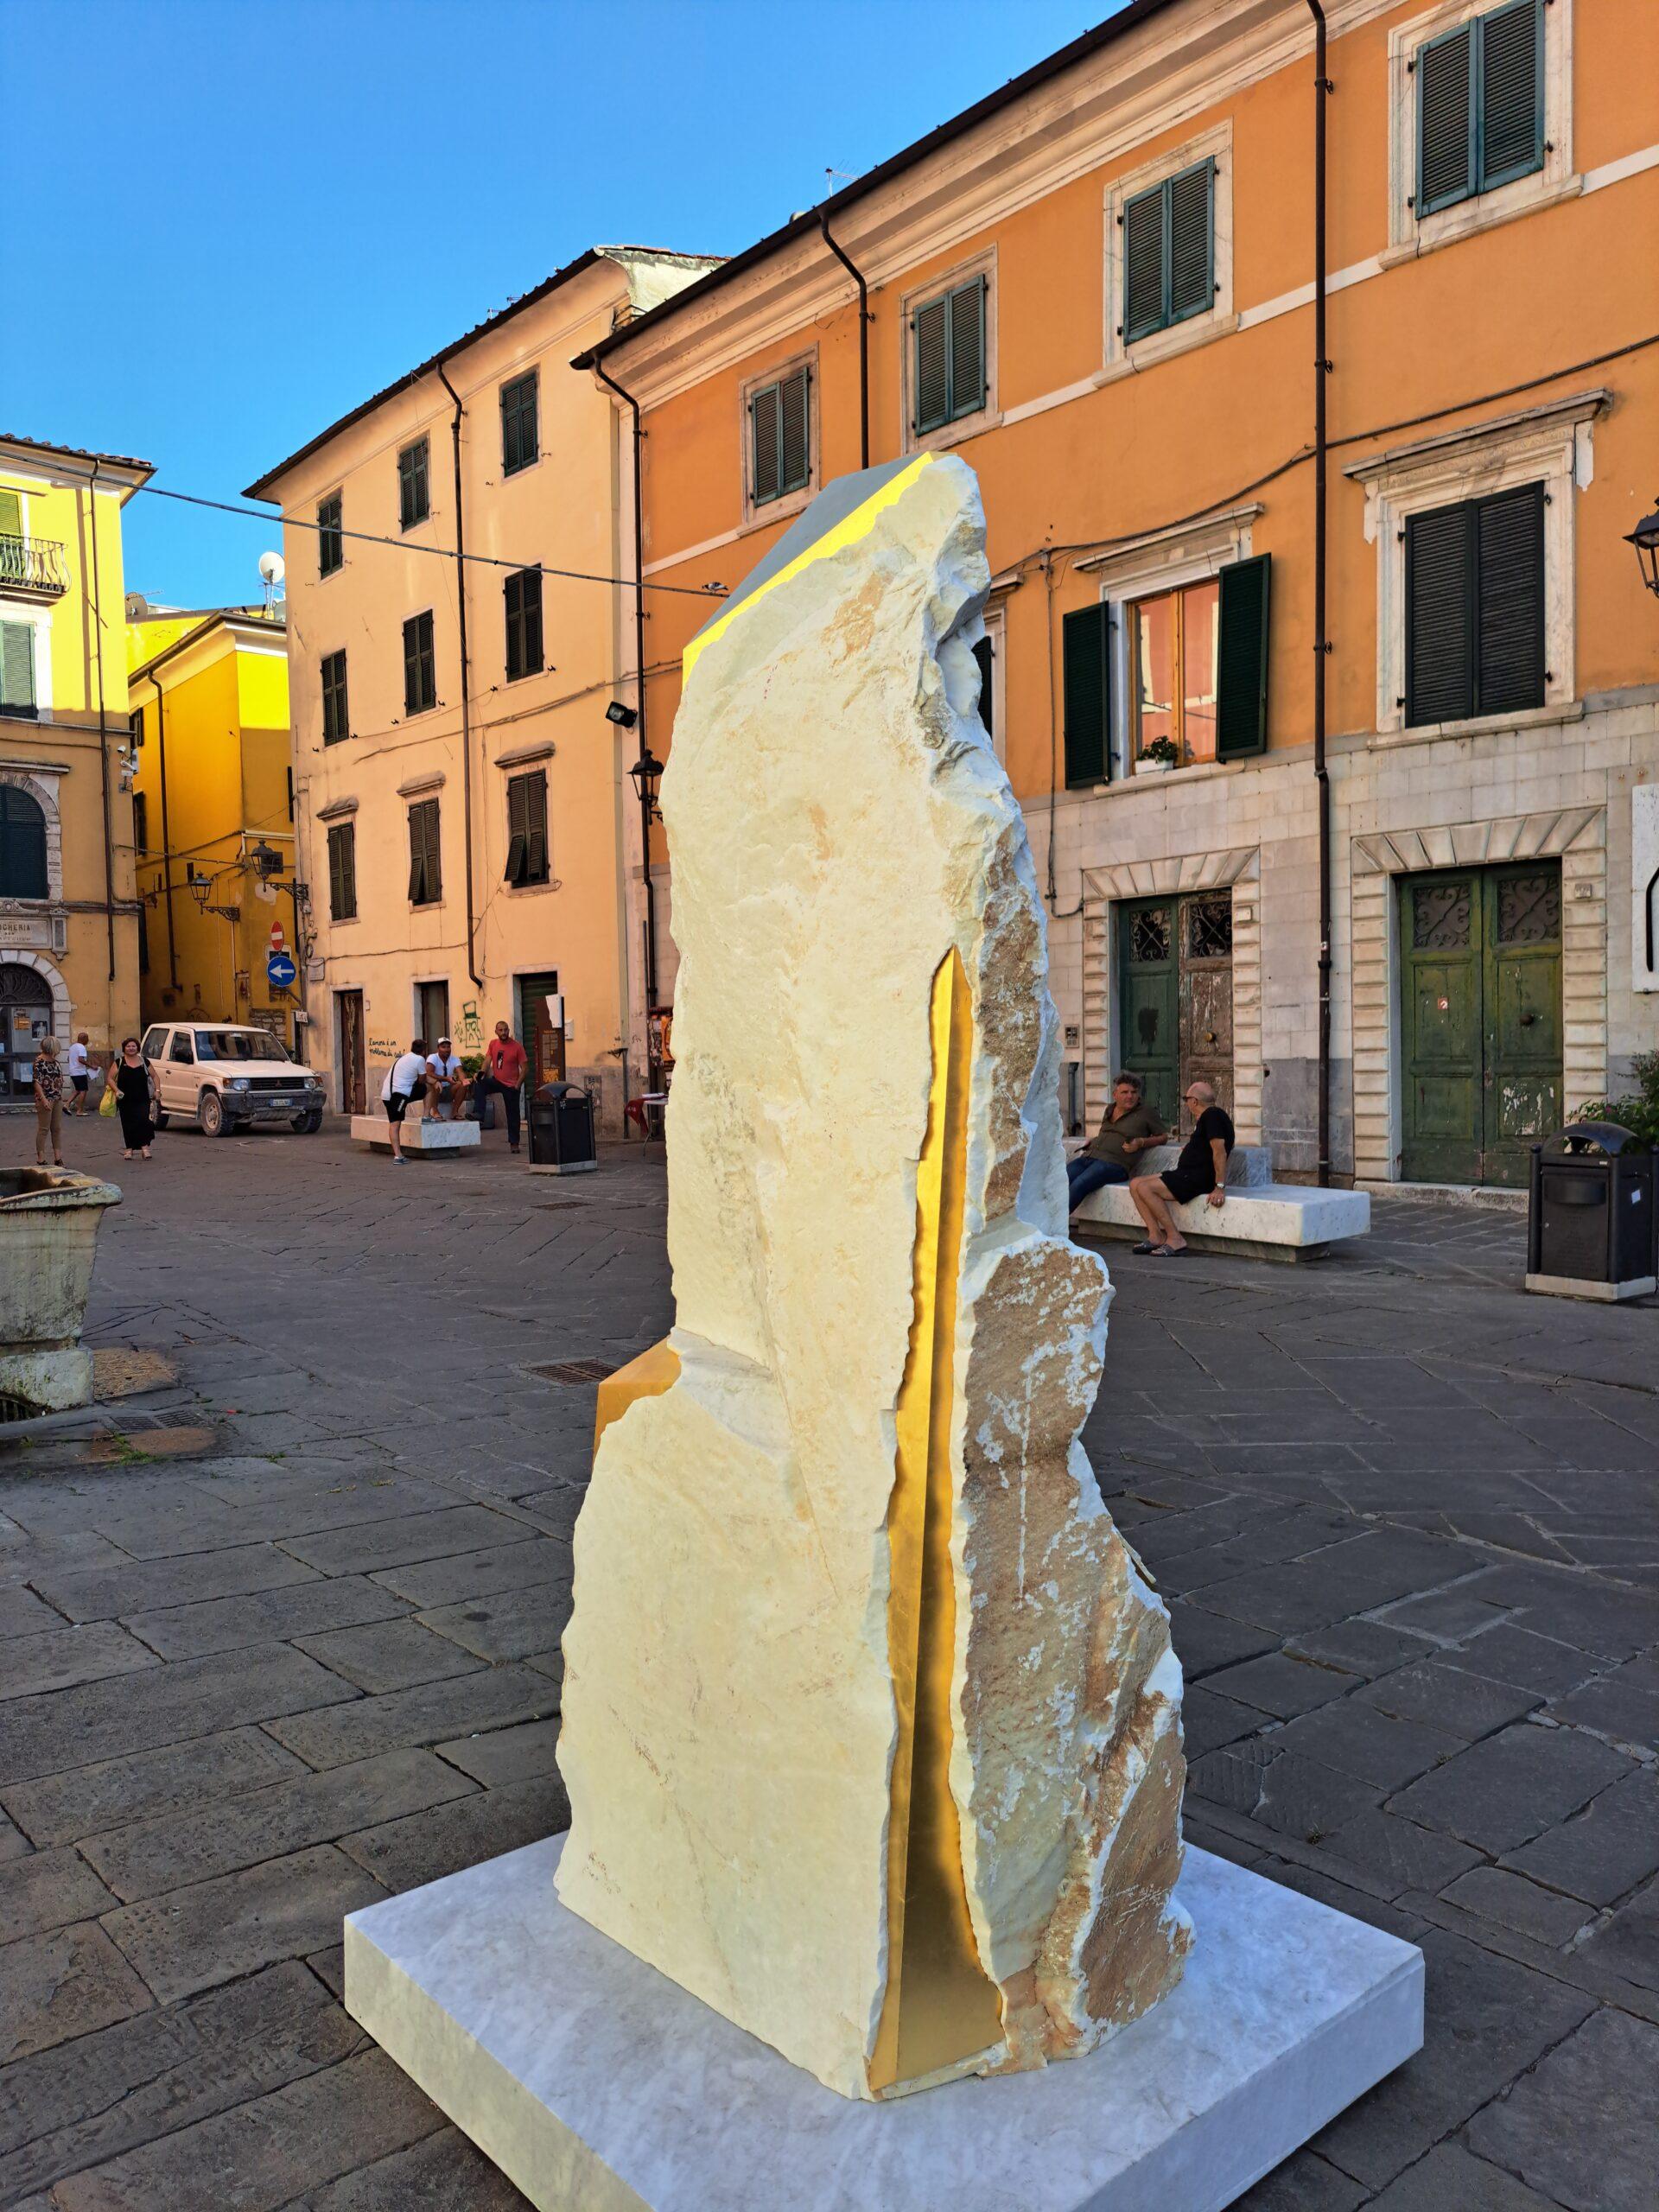 Sezione Aurea-C2 is a unique monumental sculpture by contemporary artist Mattia Bosco. This sculpture is made of Cave Michelangelo statuary marble and 23.8-carat gold leaf, dimensions are 232 × 86 × 69 cm (91.3 × 33.9 × 27.2 in). 
The sculpture